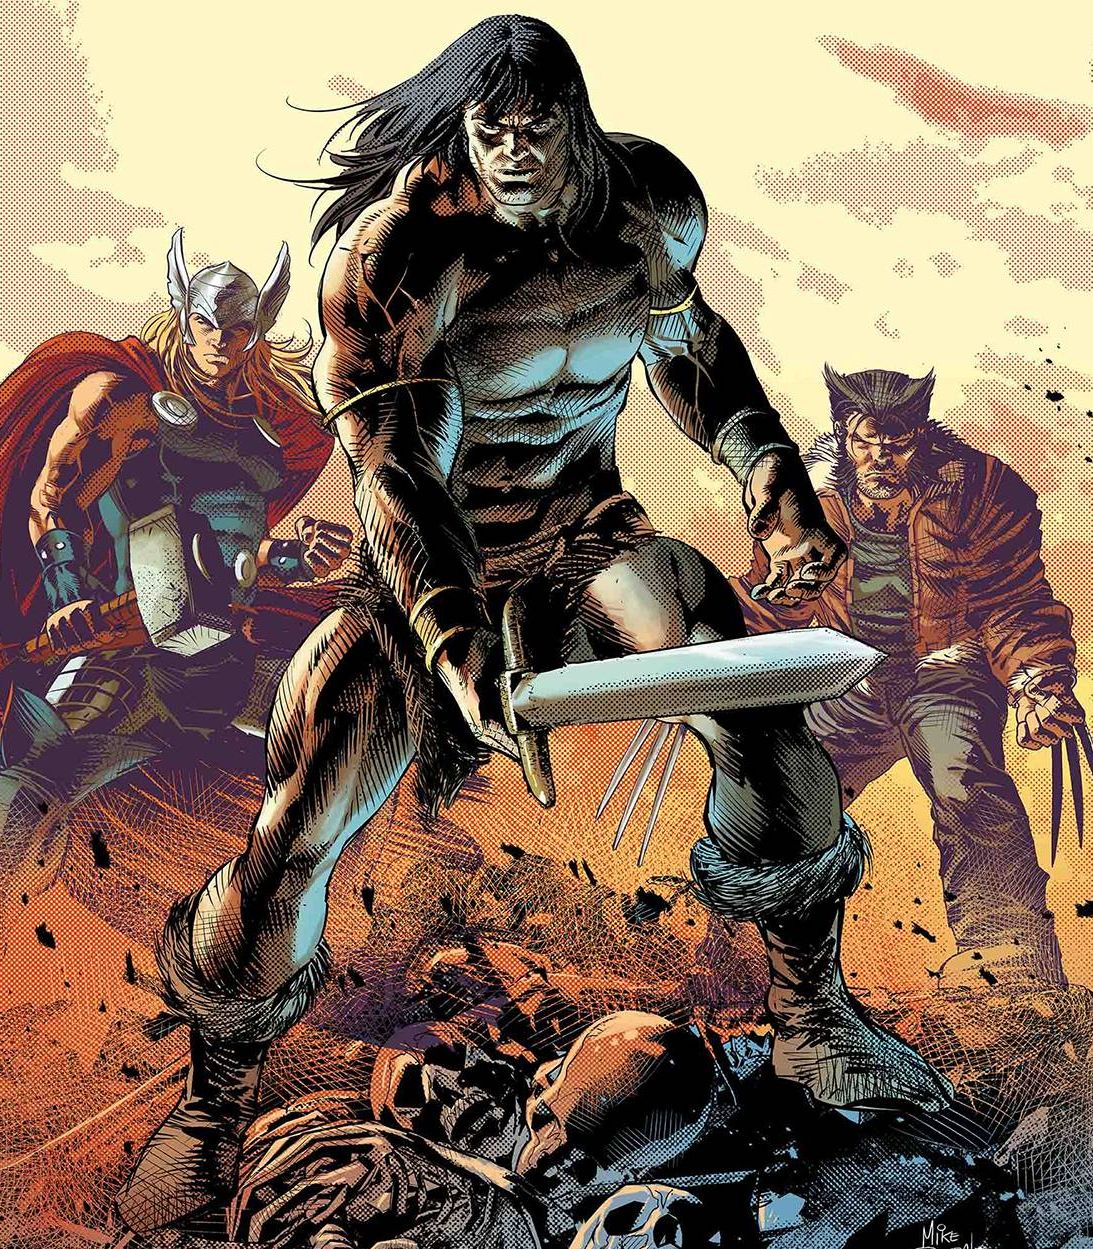 Conan the Barbarian Savage Avengers #1 Variant by Mike Deodato